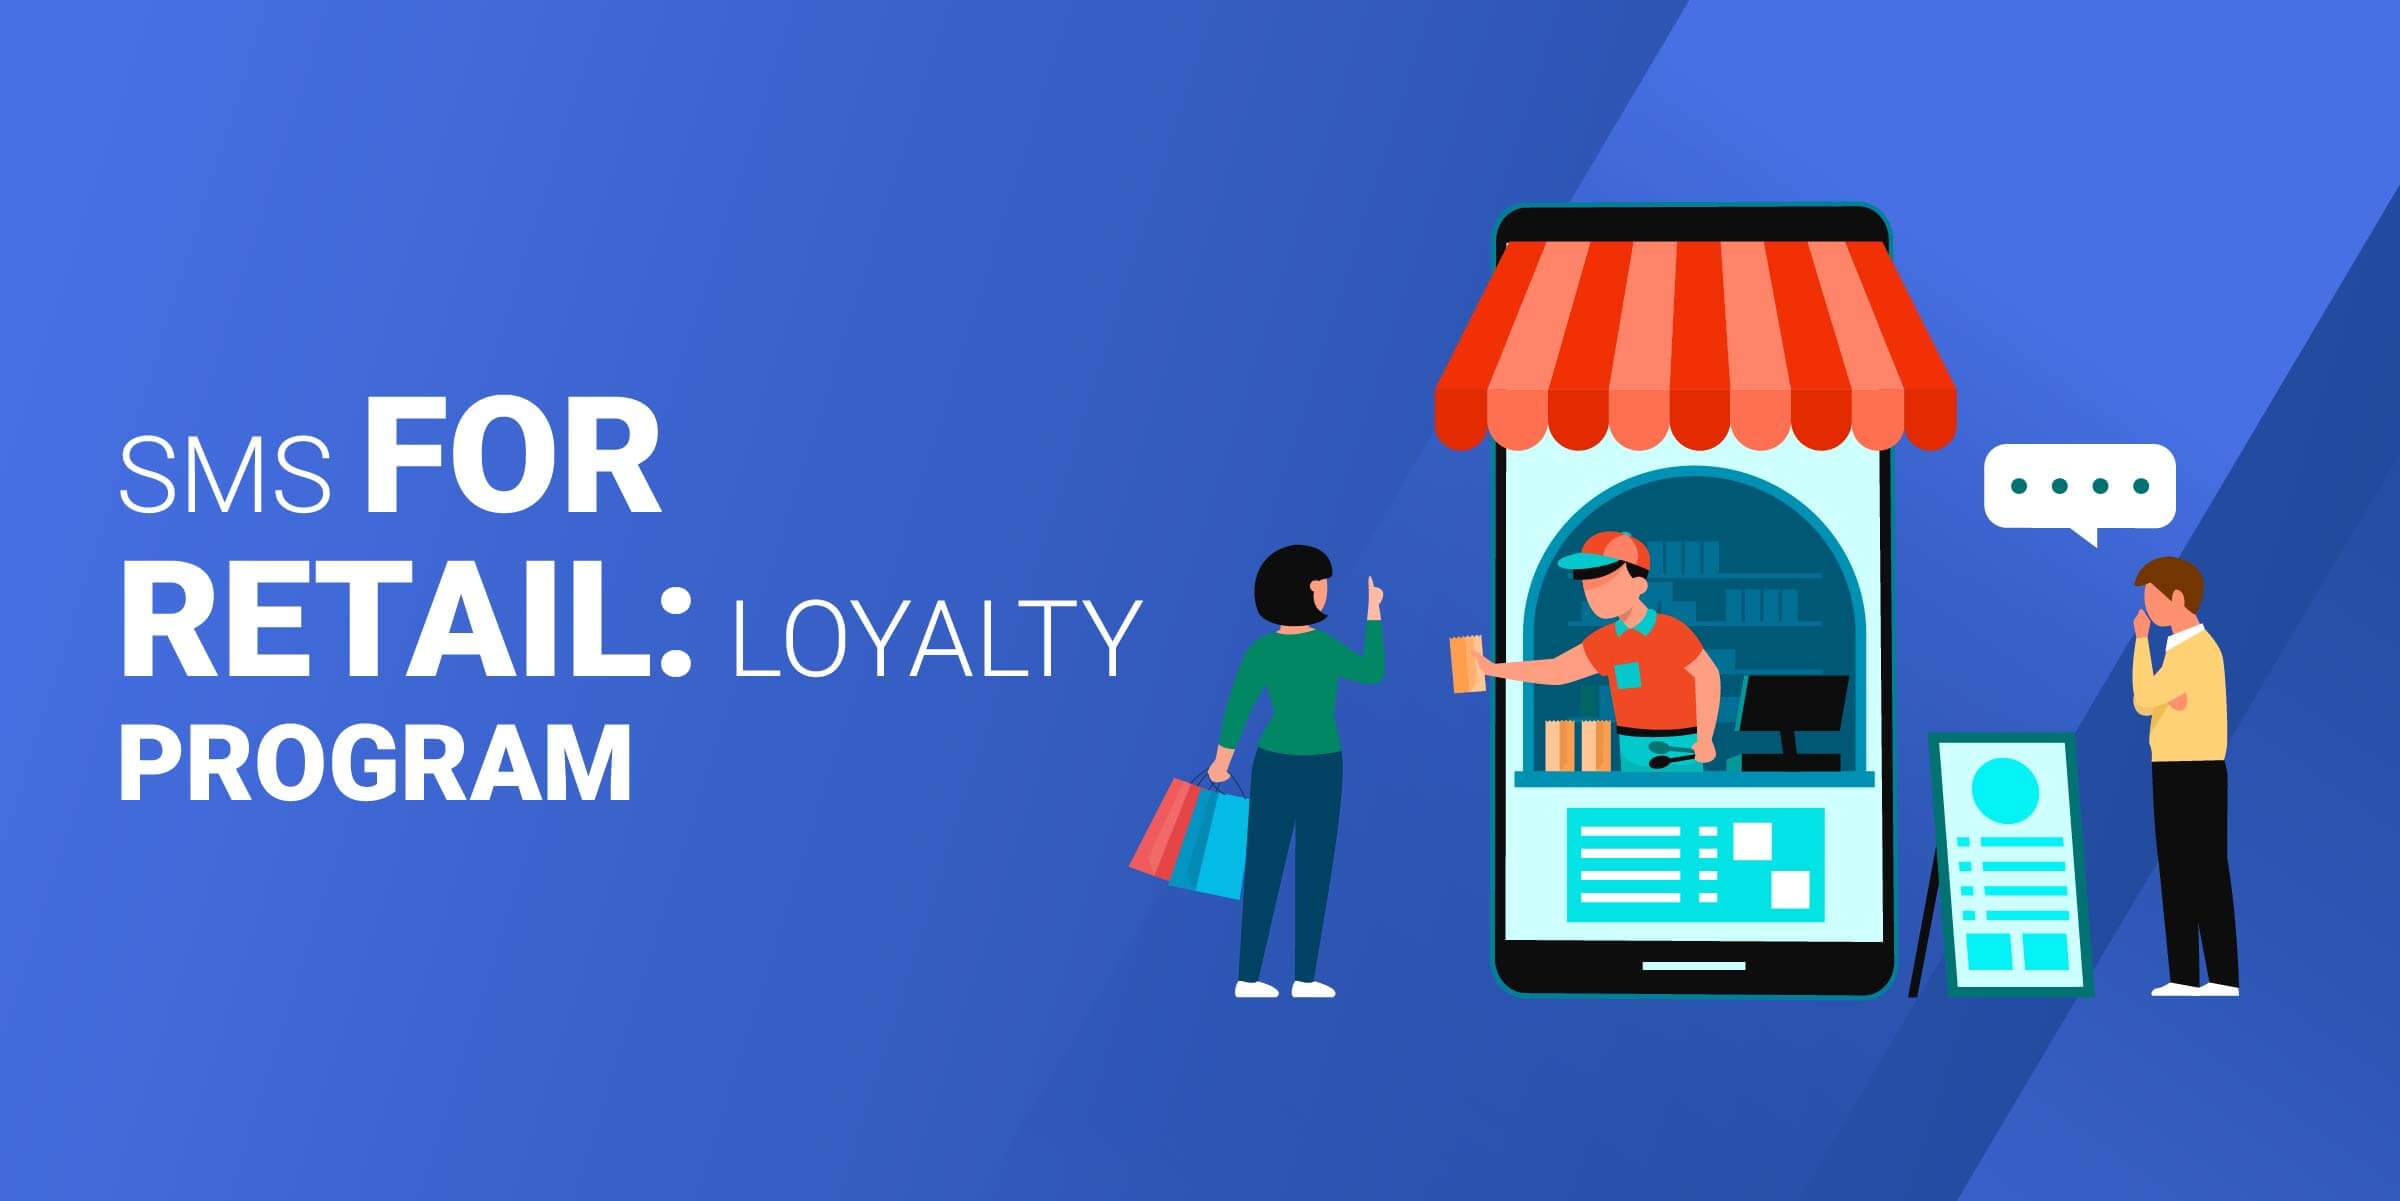 SMS for Retail Loyalty